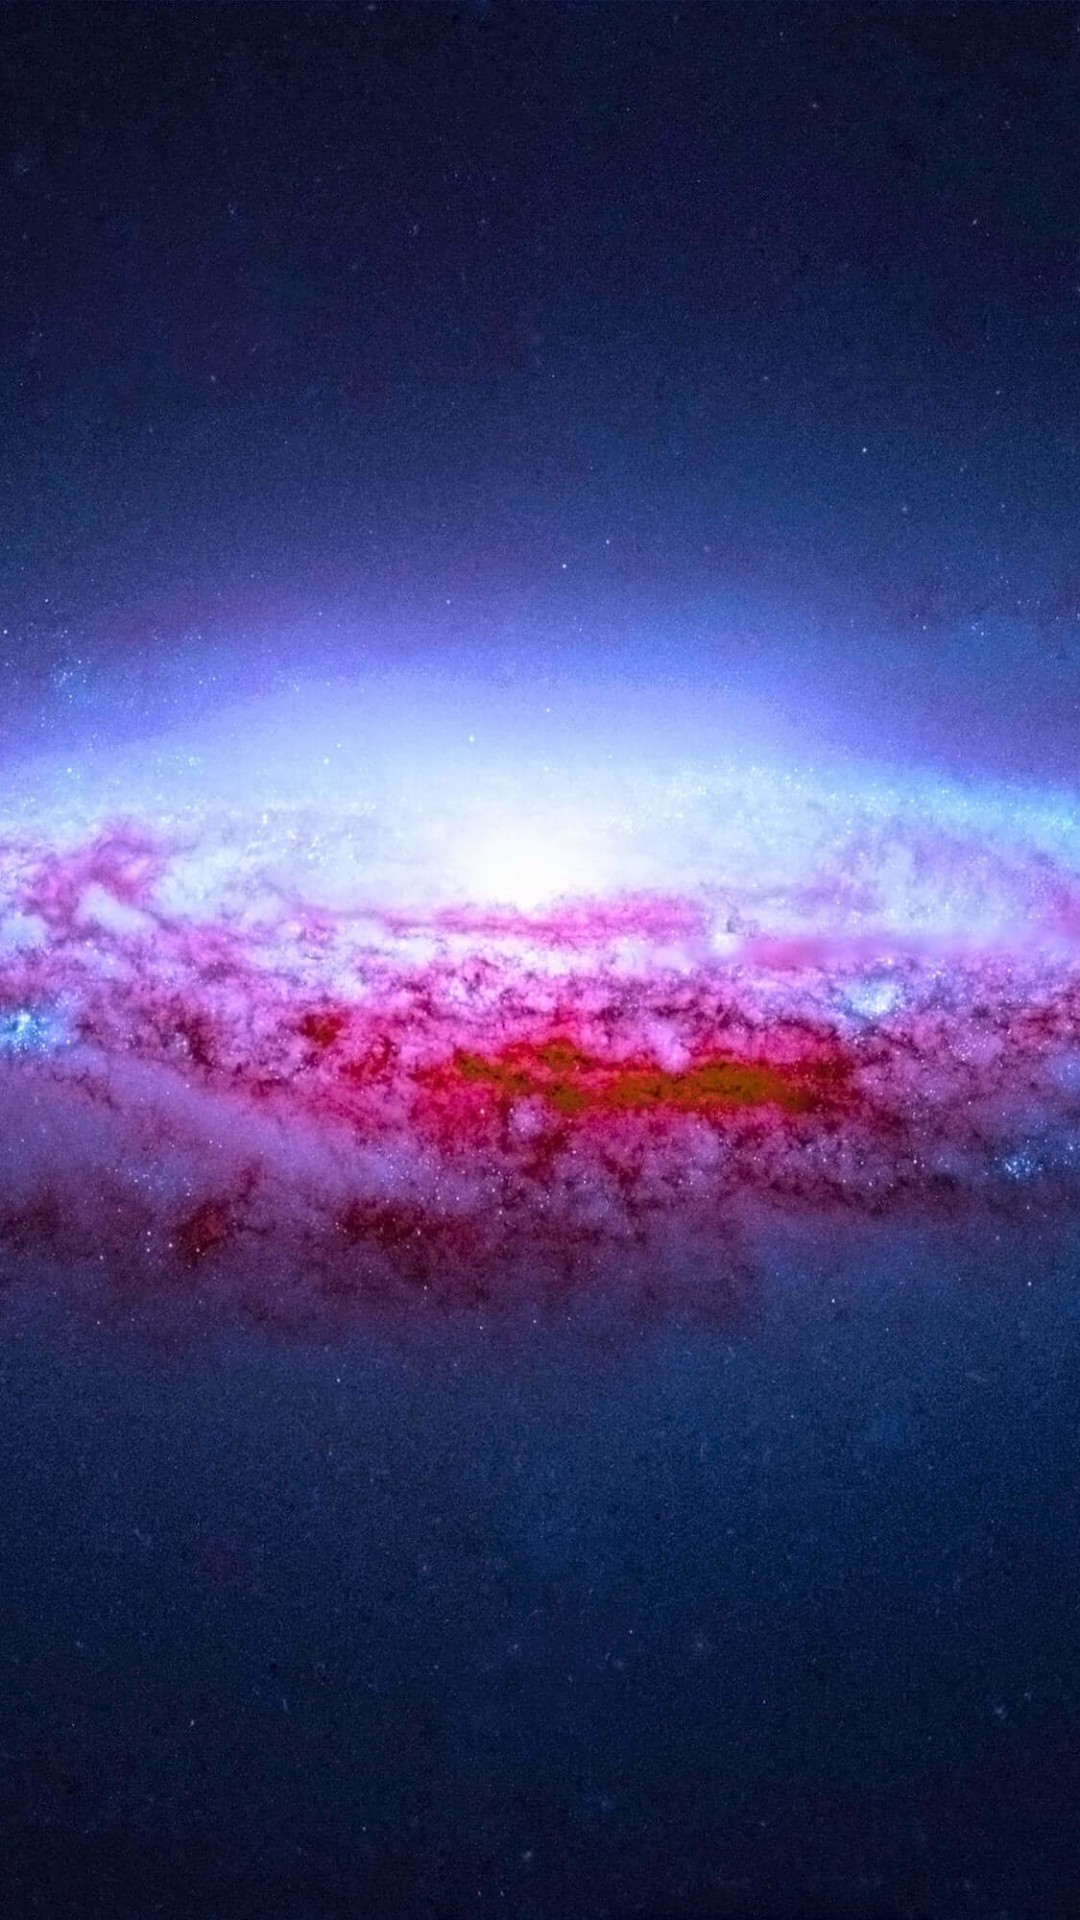 NGC 2683 Spiral Galaxy Wallpaper for SONY Xperia Z3